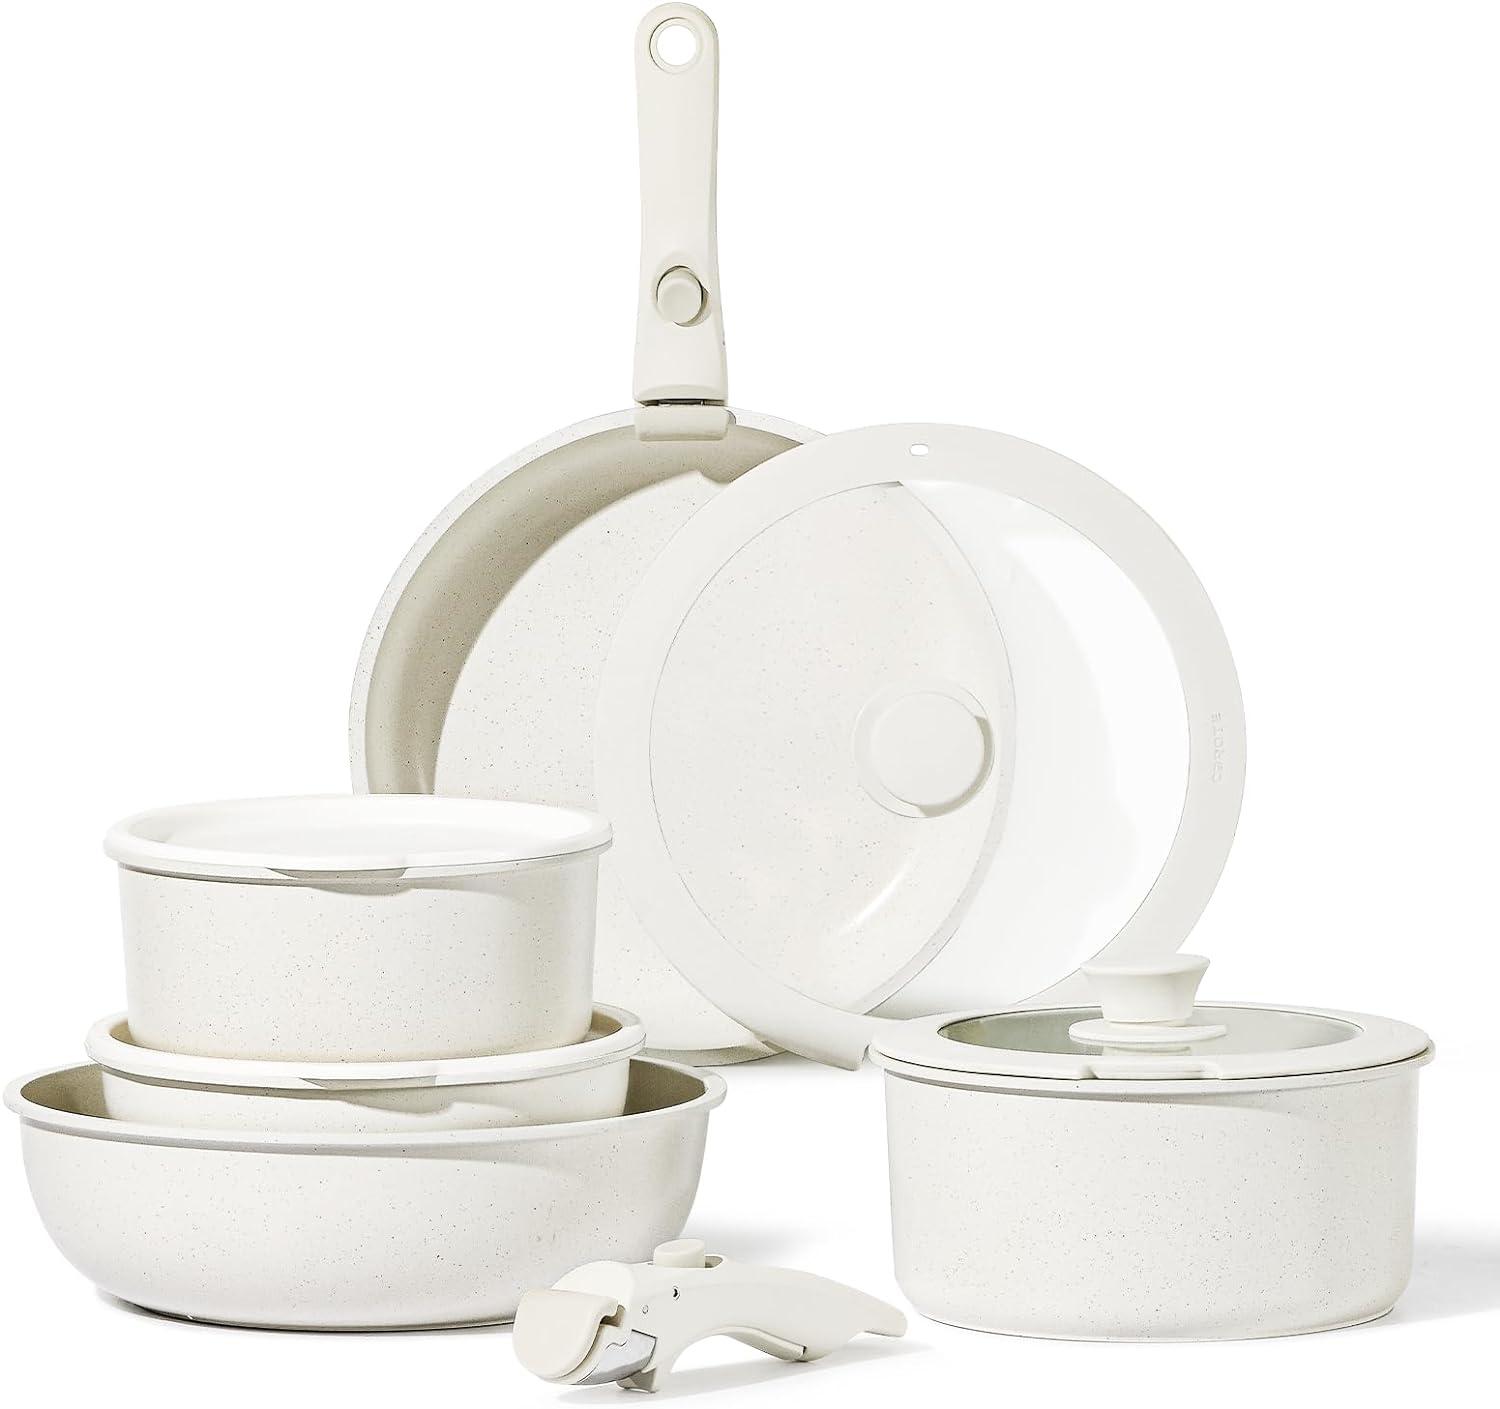 Carote 11-Piece Pots and Pans Set for $59.99 Shipped